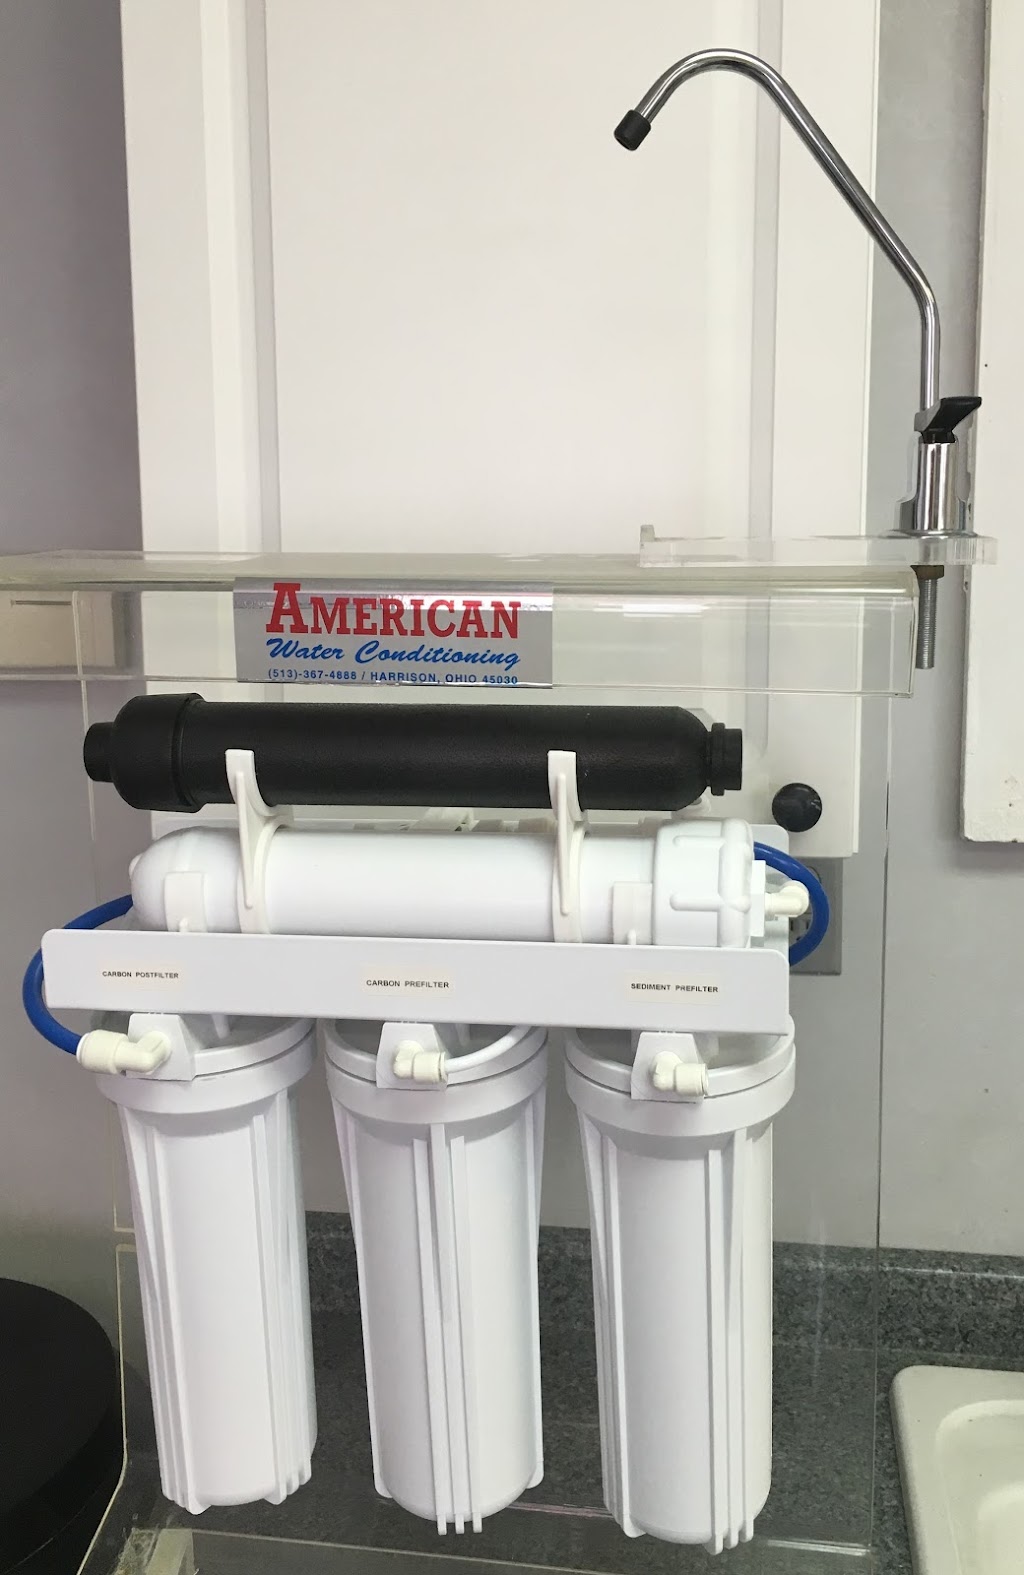 American Water and Plumbing | 124 N State St, Harrison, OH 45030 | Phone: (513) 367-4888